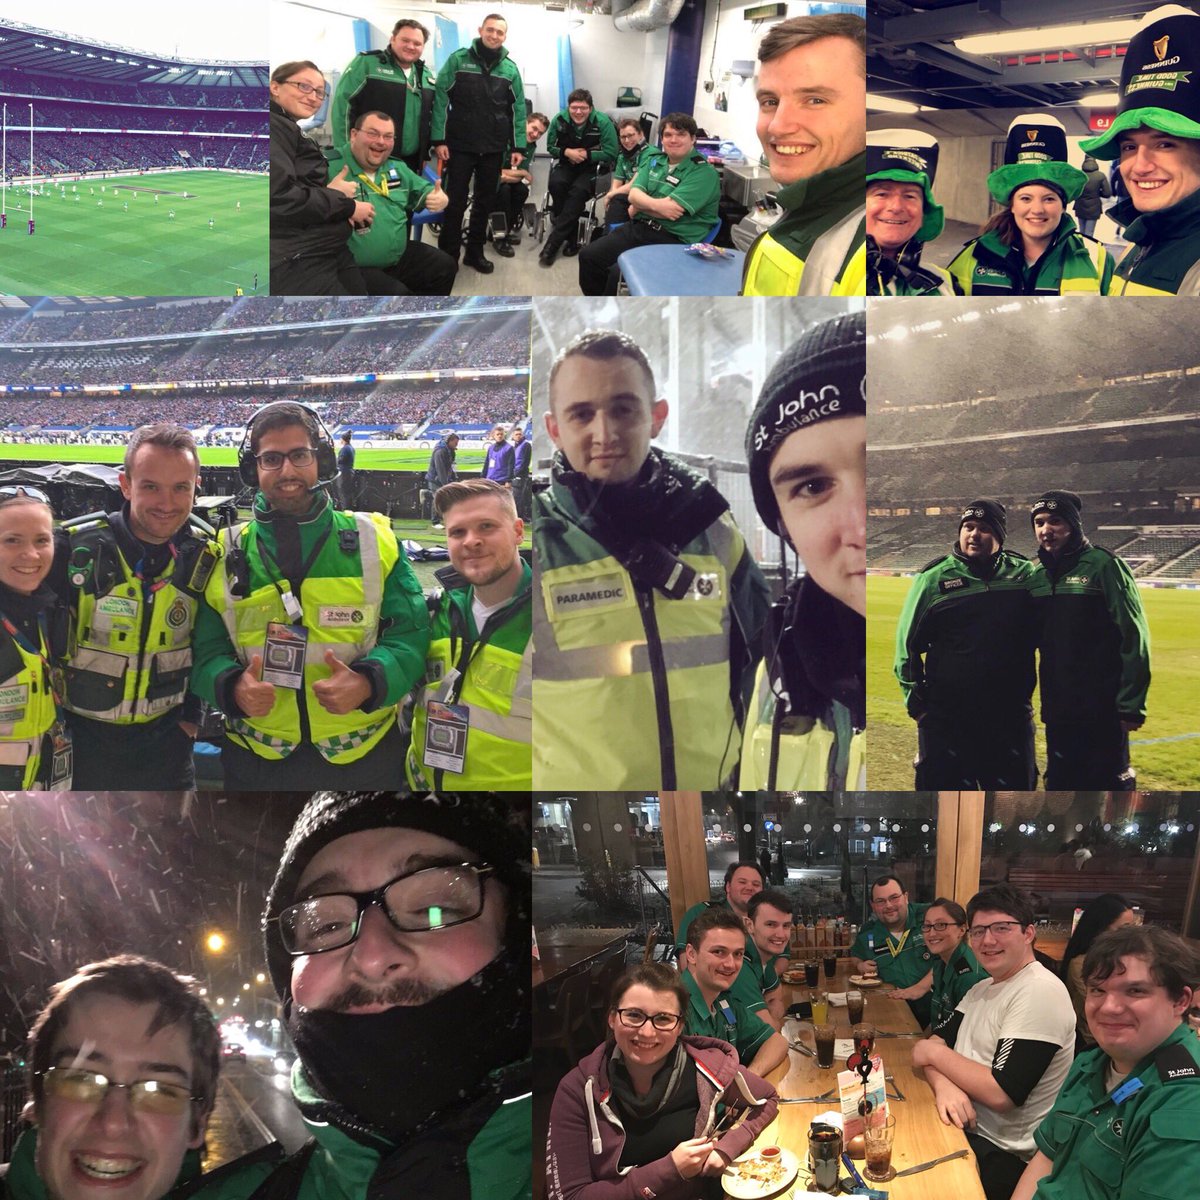 Thanks to all the @stjohnambulance #volunteers who supported #WestLondon District at #Twickenham today for the #NatWest6Nations #ENGvIRE #rugby 🏉 match.

As you can see #volunteering is not just about #FirstAid glad to you having some R&R after.